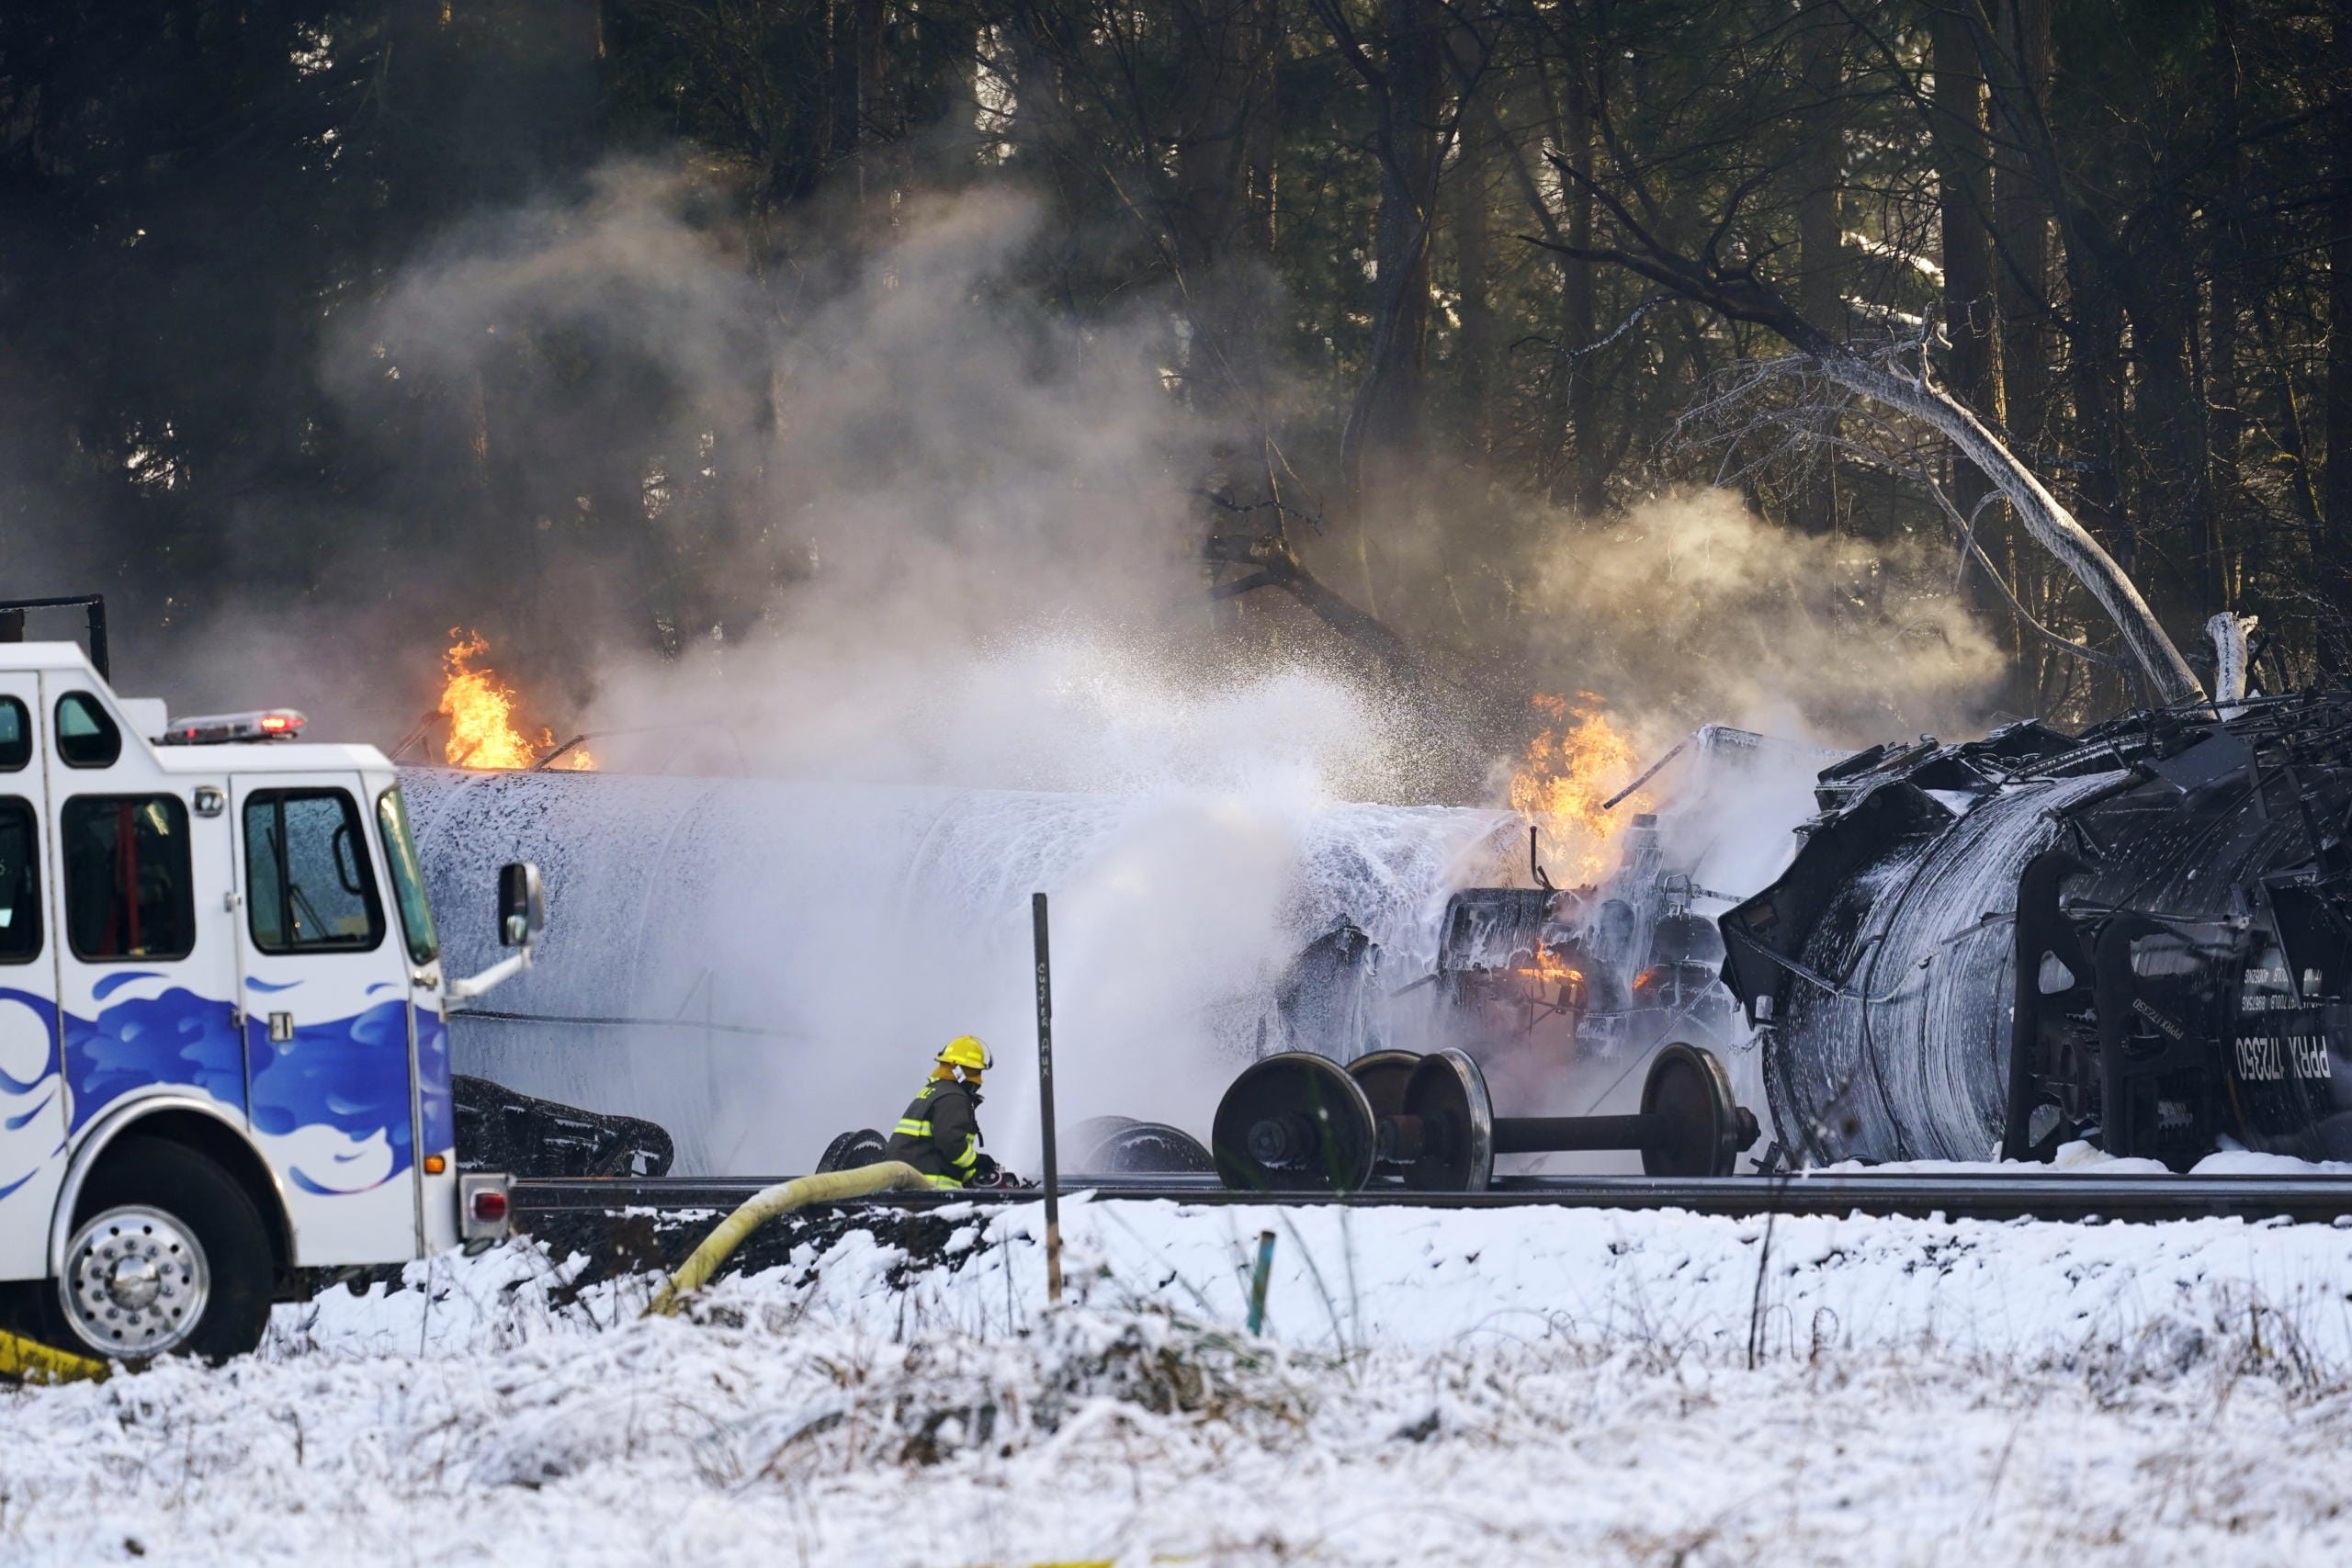 A firefighter sprays foam on burning, derailed train cars Tuesday, Dec. 22, 2020, in Custer, Wash. Officials say seven train cars carrying crude oil derailed and five caught fire north of Seattle and close to the Canadian border. Whatcom County officials said the derailment occurred in the downtown Custer area, where streets were closed and evacuations ordered during a large fire response.